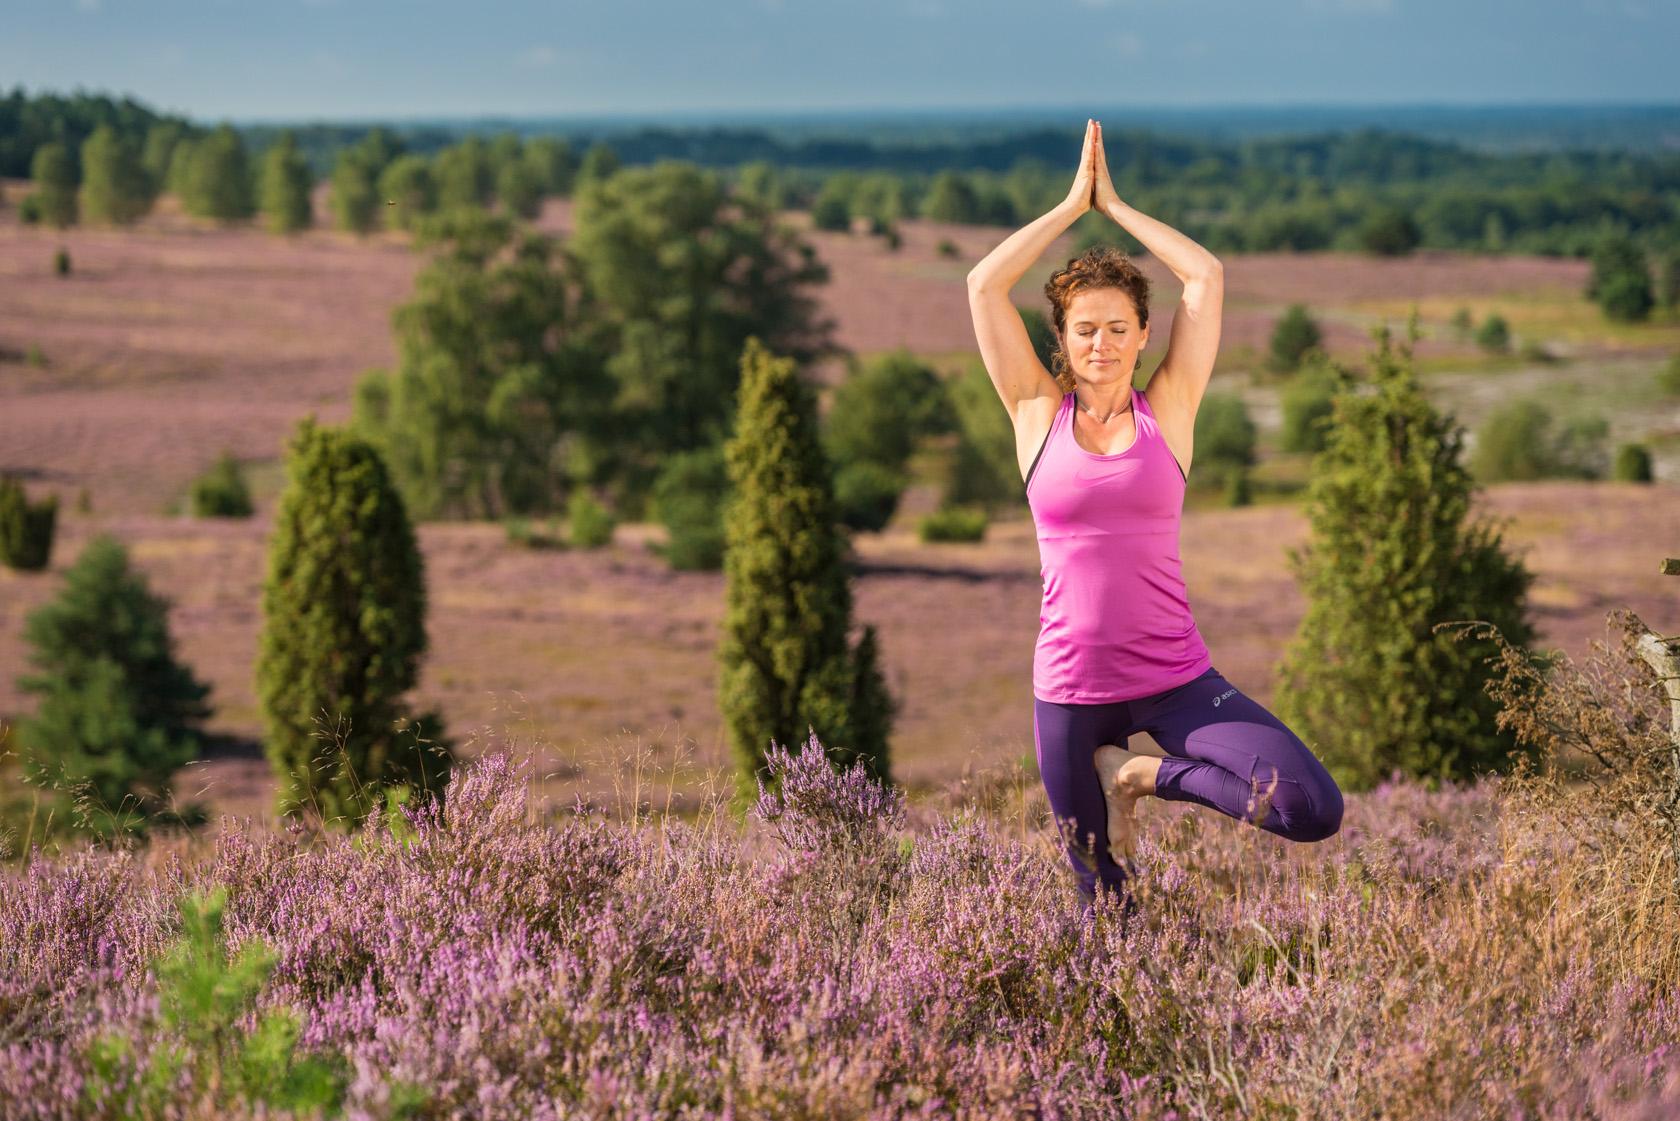 Headstands, happiness and naked yoga: interview with a yoga teacher